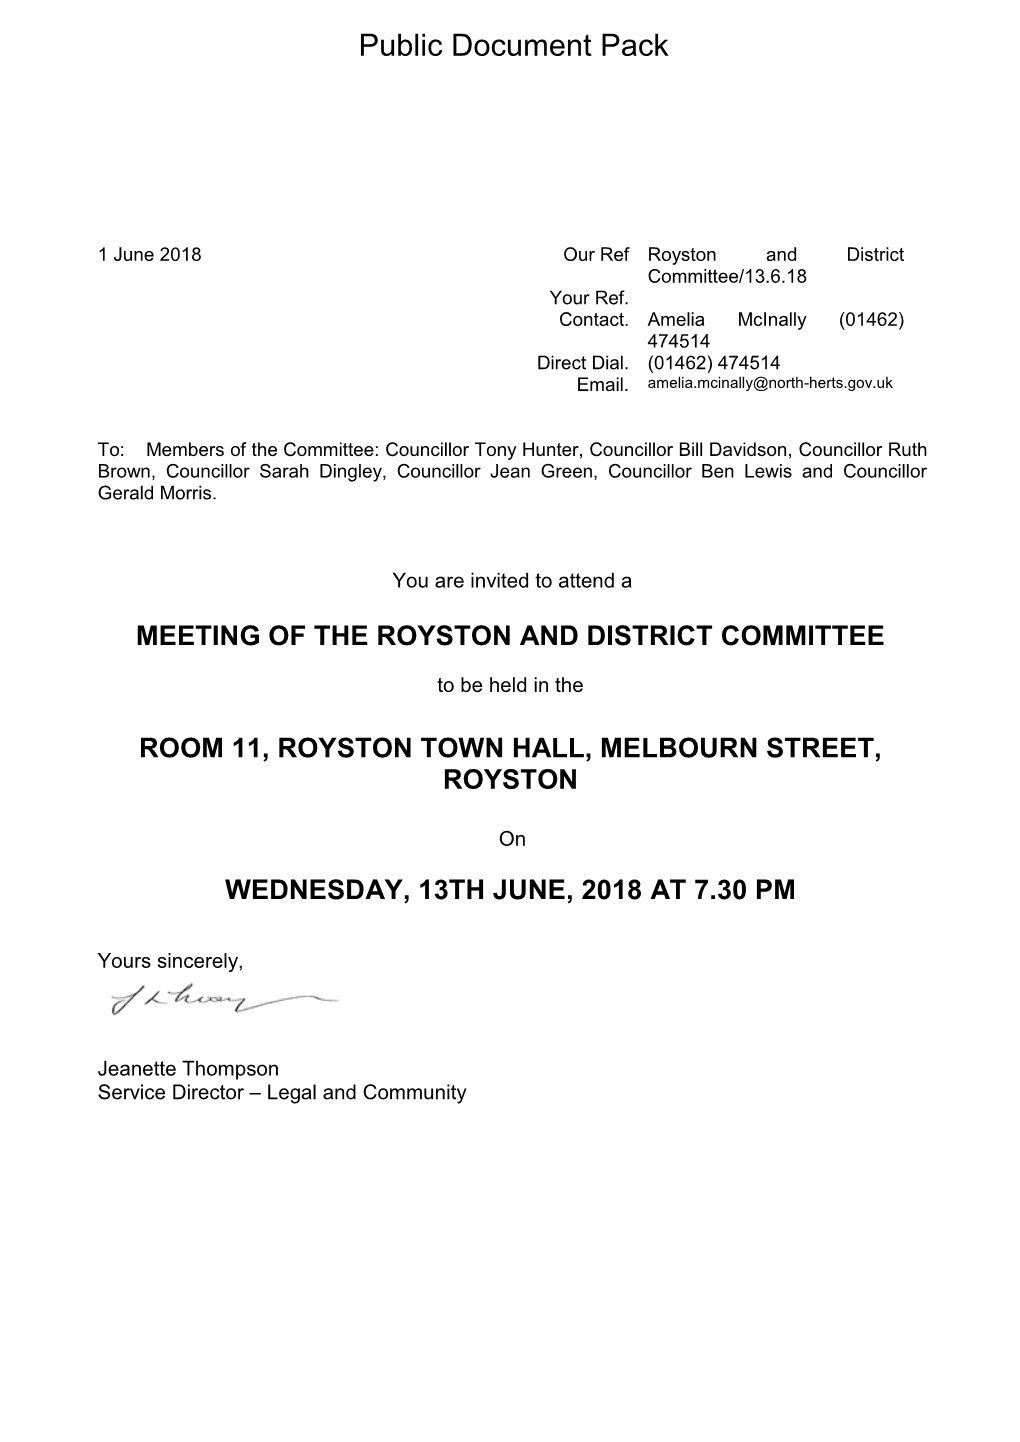 (Public Pack)Agenda Document for Royston and District Committee, 13